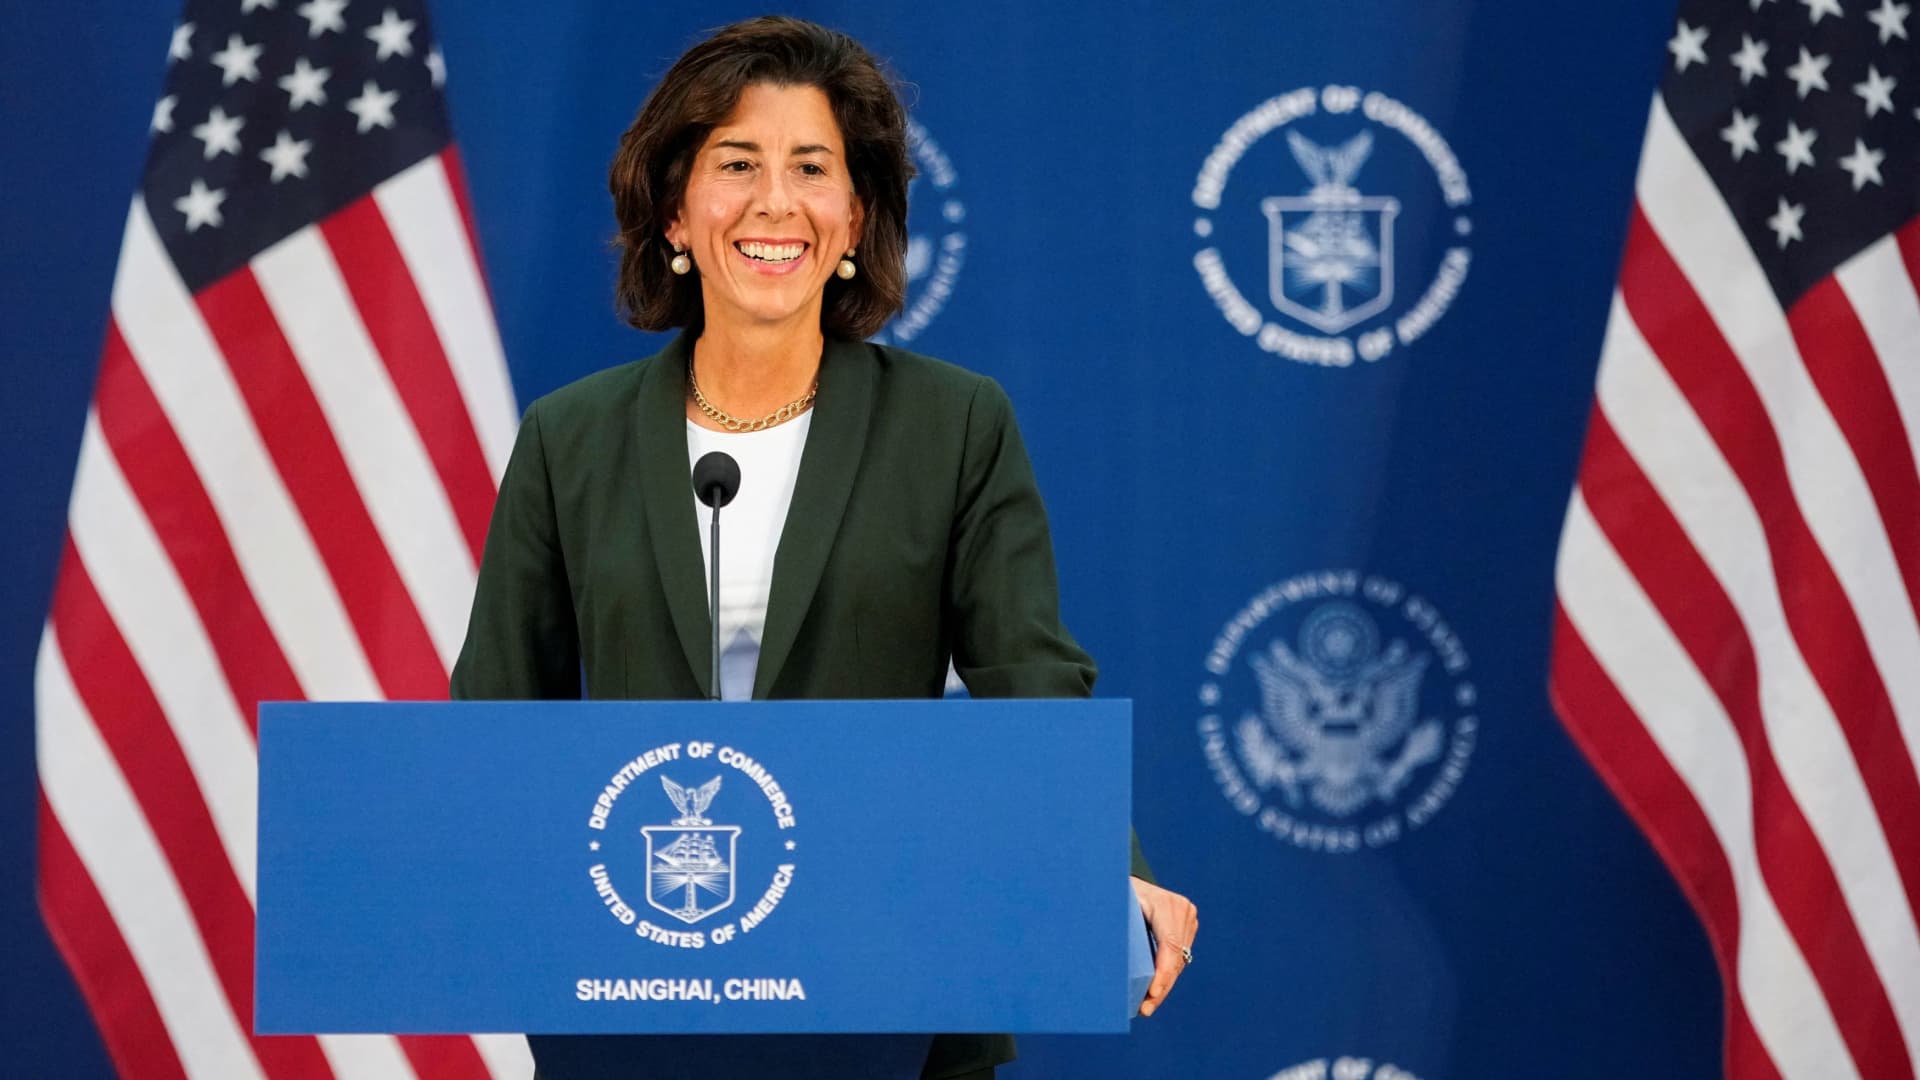 Commerce Secretary Raimondo: U.S. businesses are 'desperate for some kind of dialogue' with China